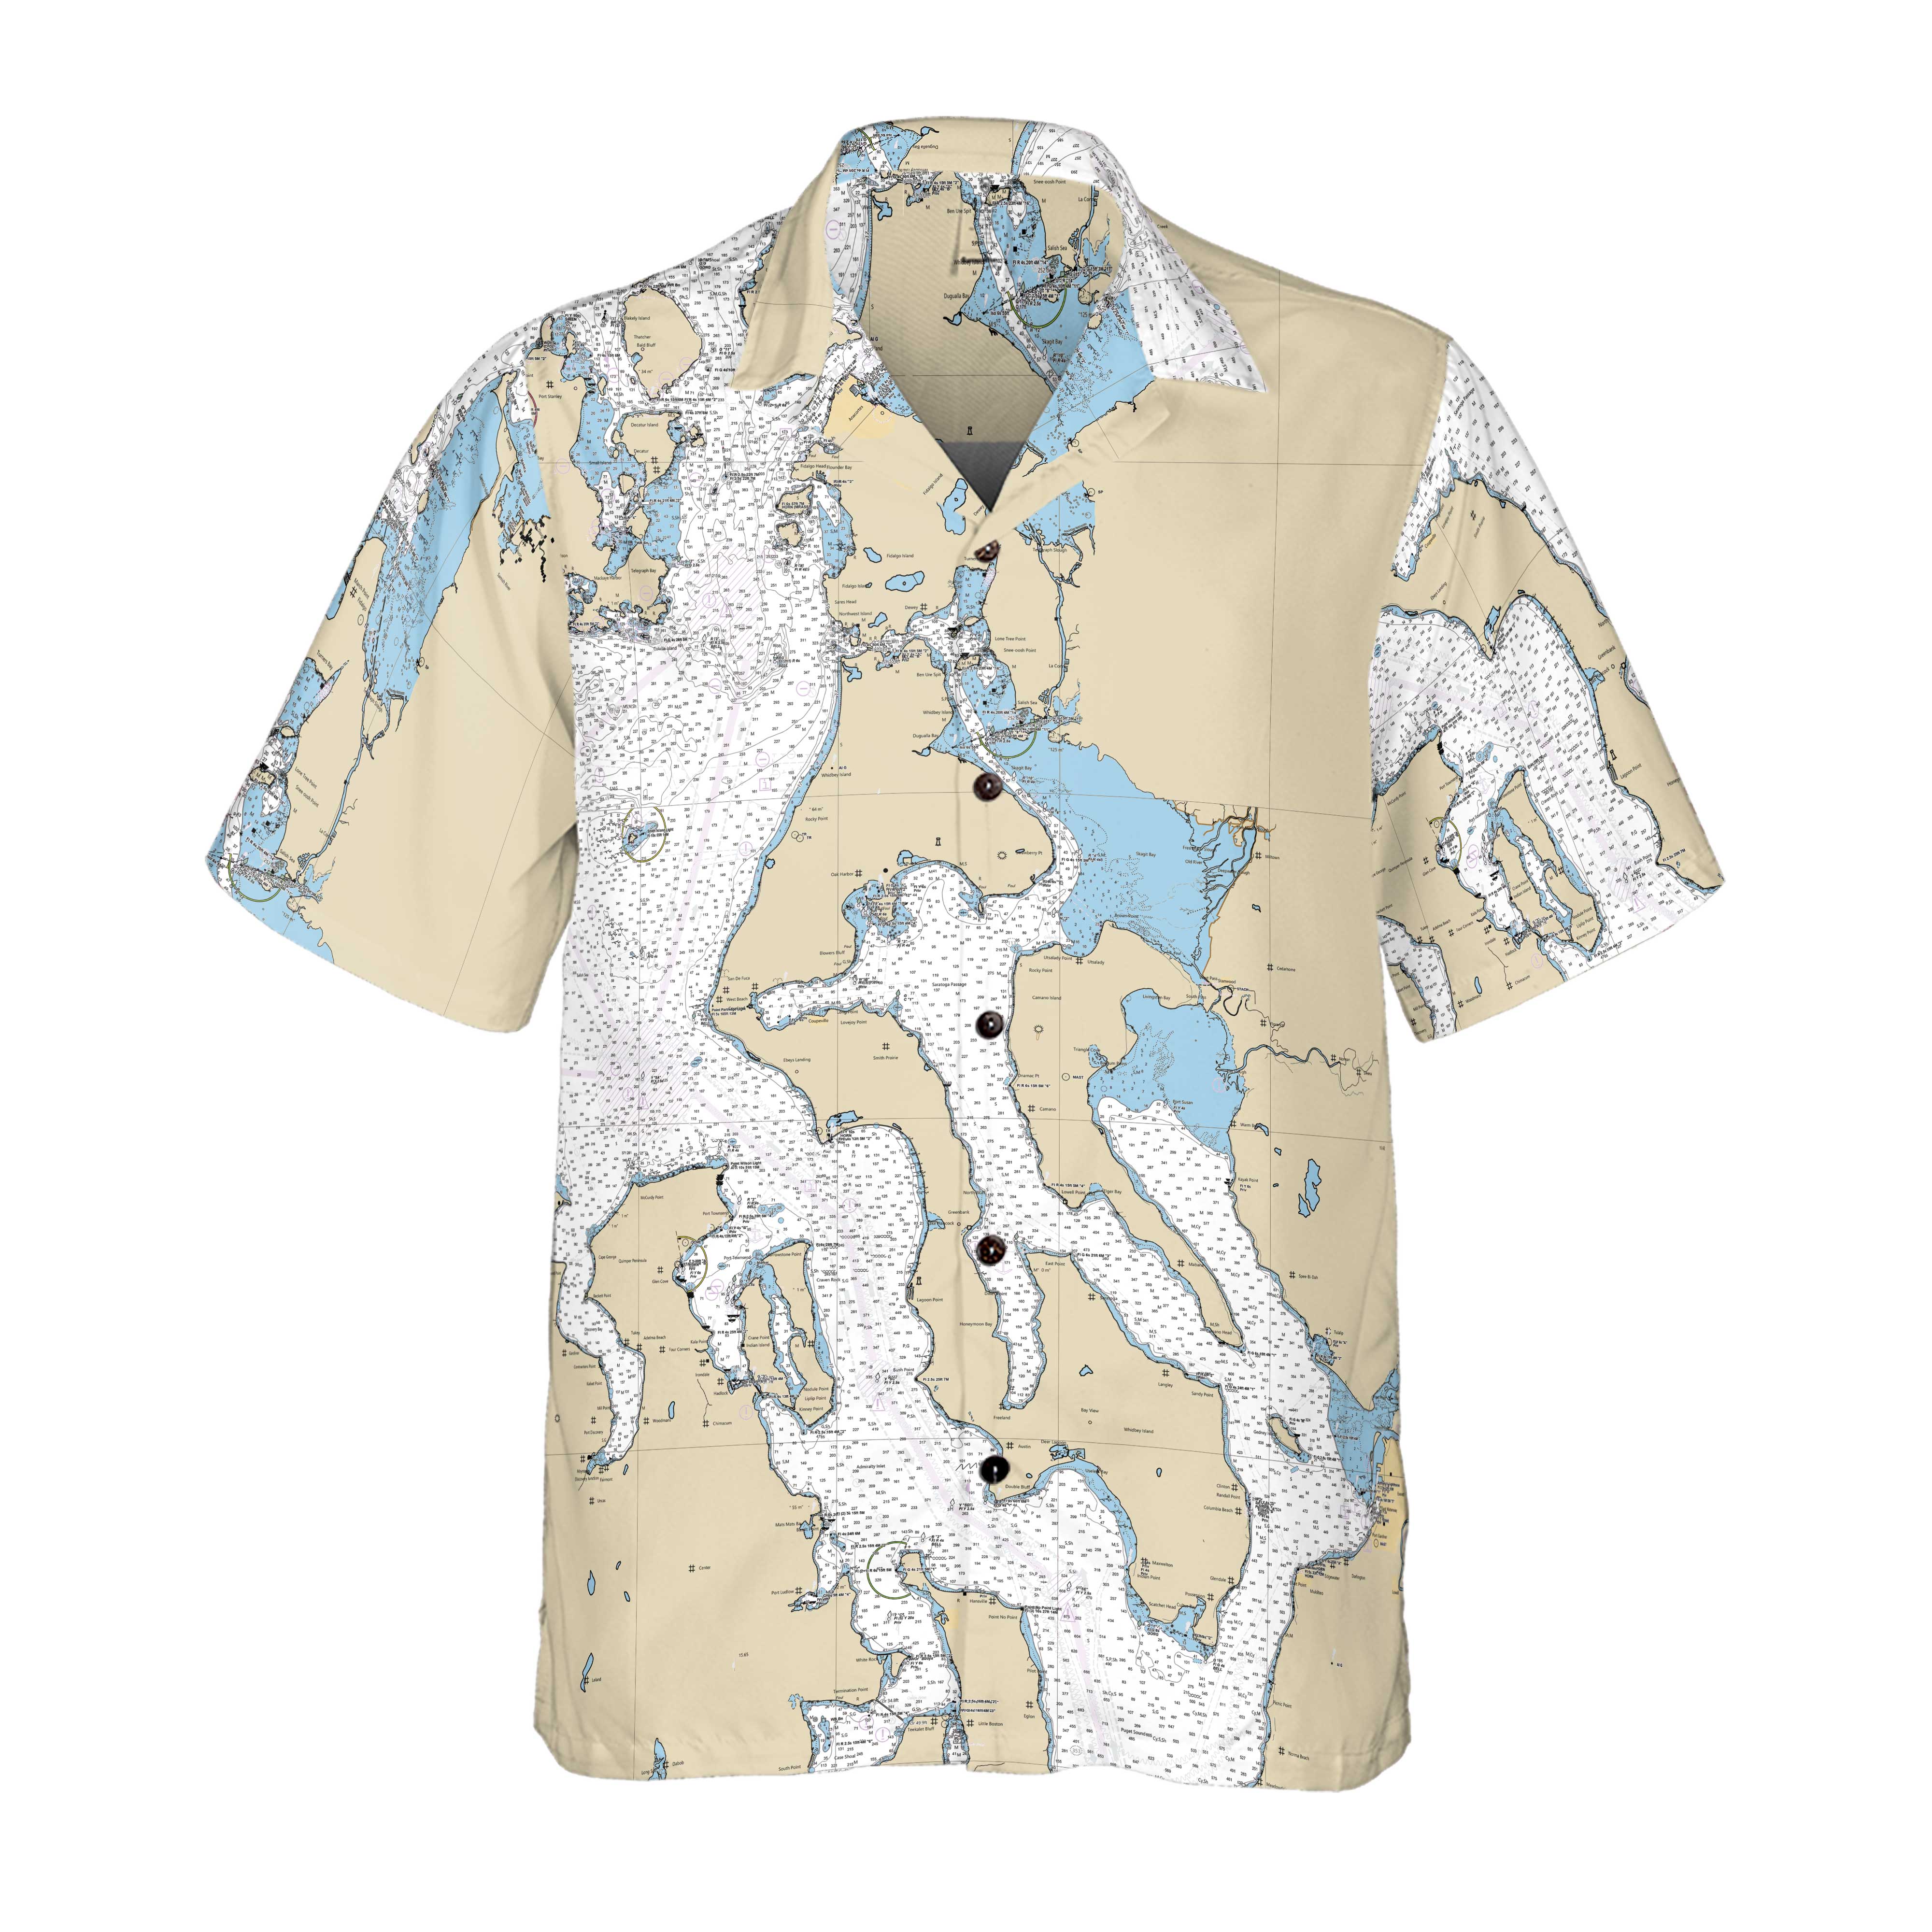 The Whidbey Island Coconut Button Camp Shirt